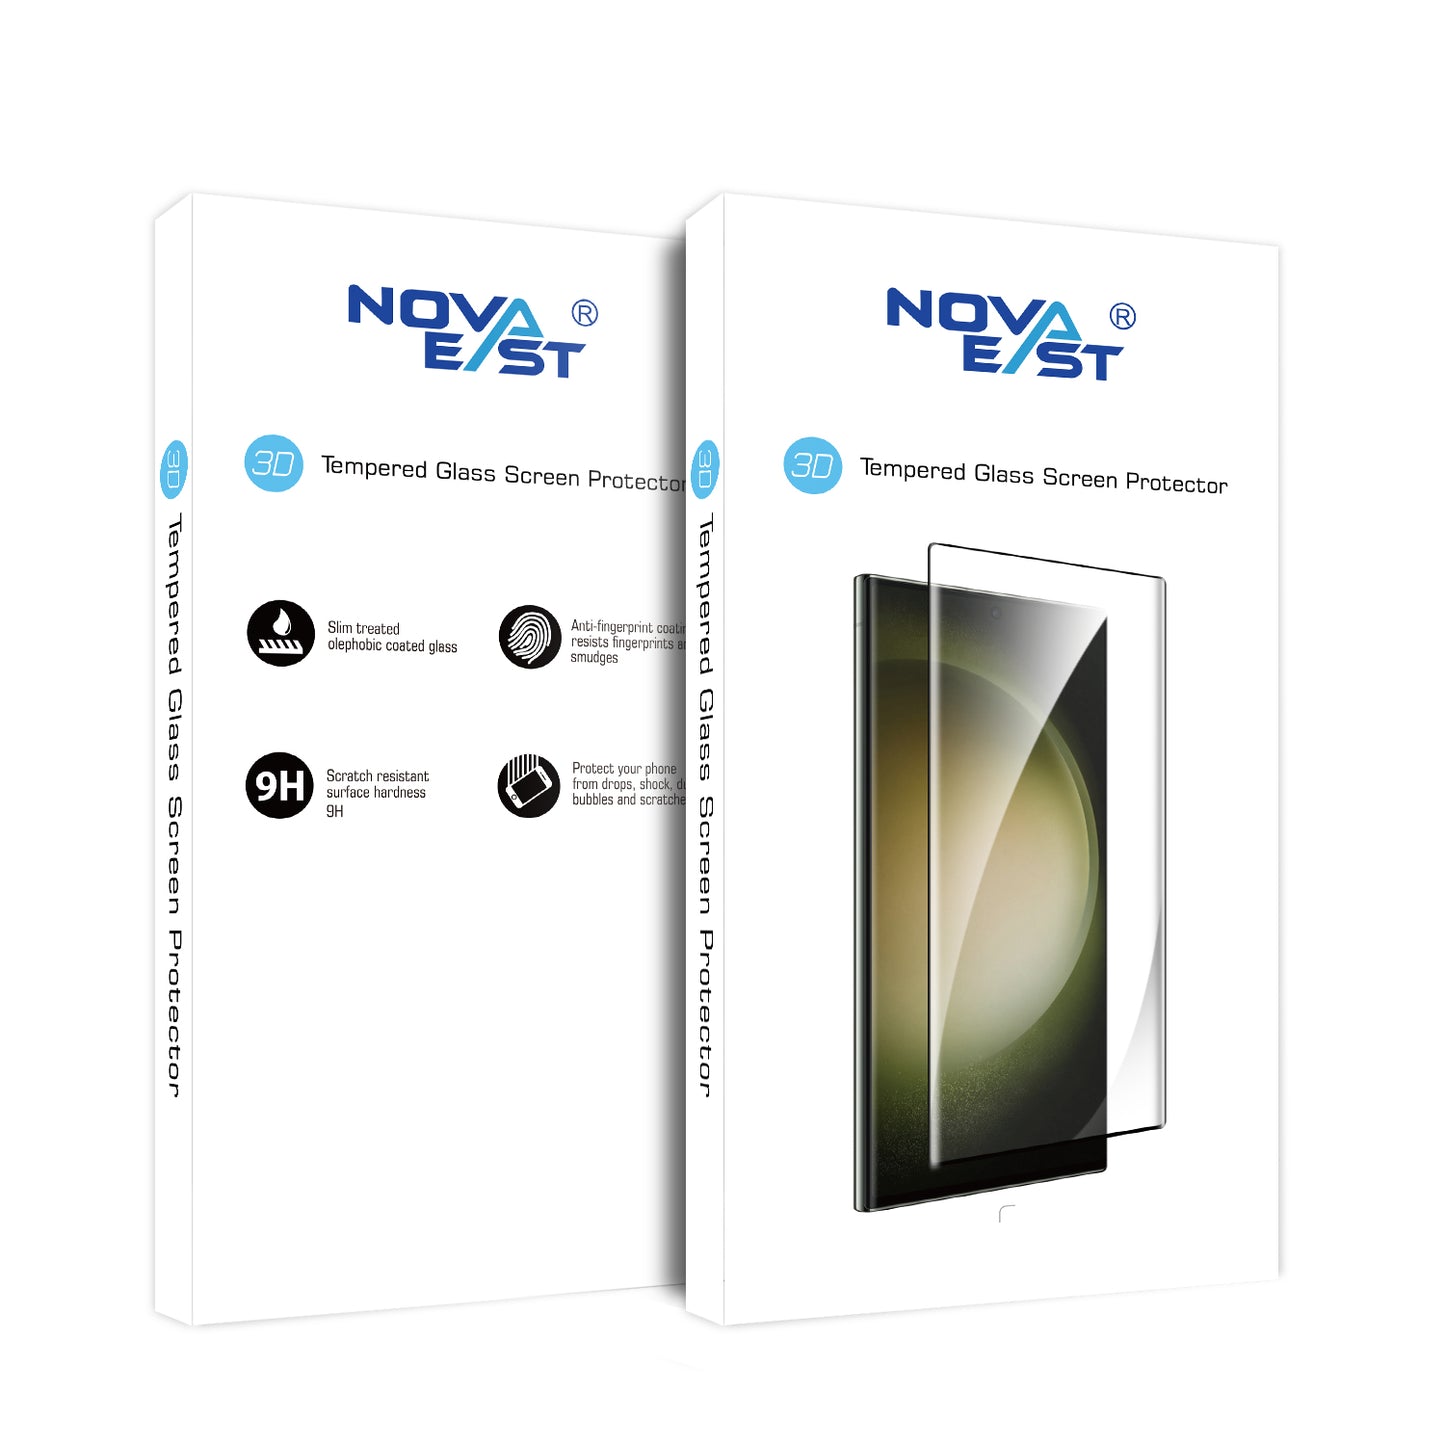 NOVAEAST Tempered Glass Screen Protector for SAMSUNG Devices 1 Sheet